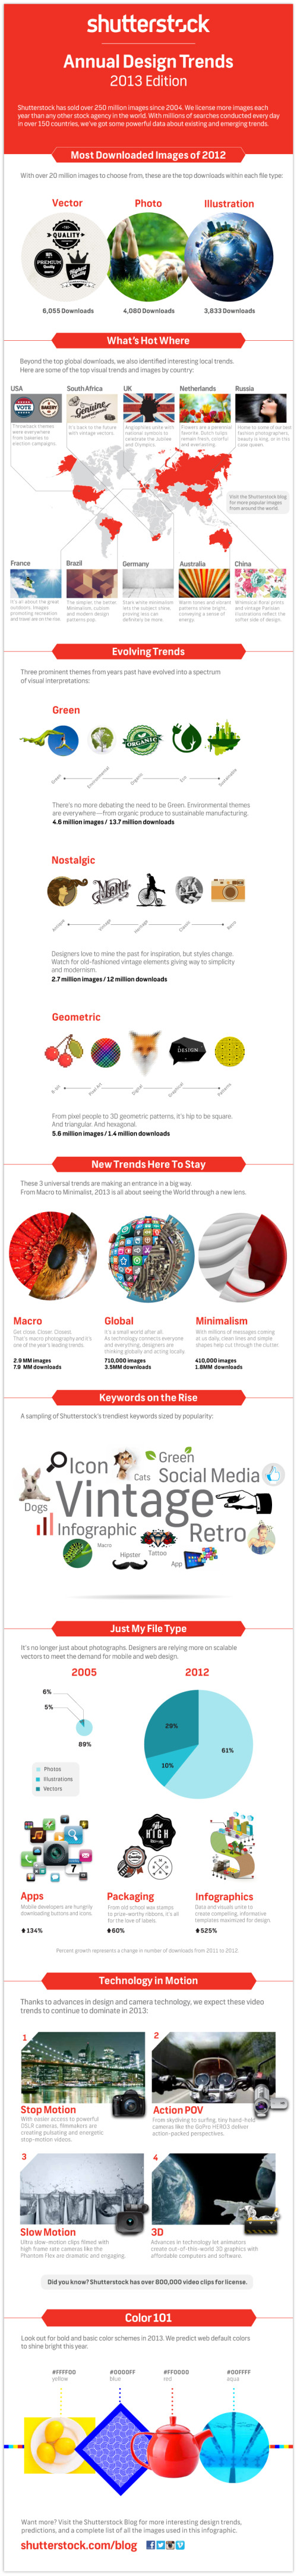 Shutterstock: Annual Design Trends 2013 Edition infographic